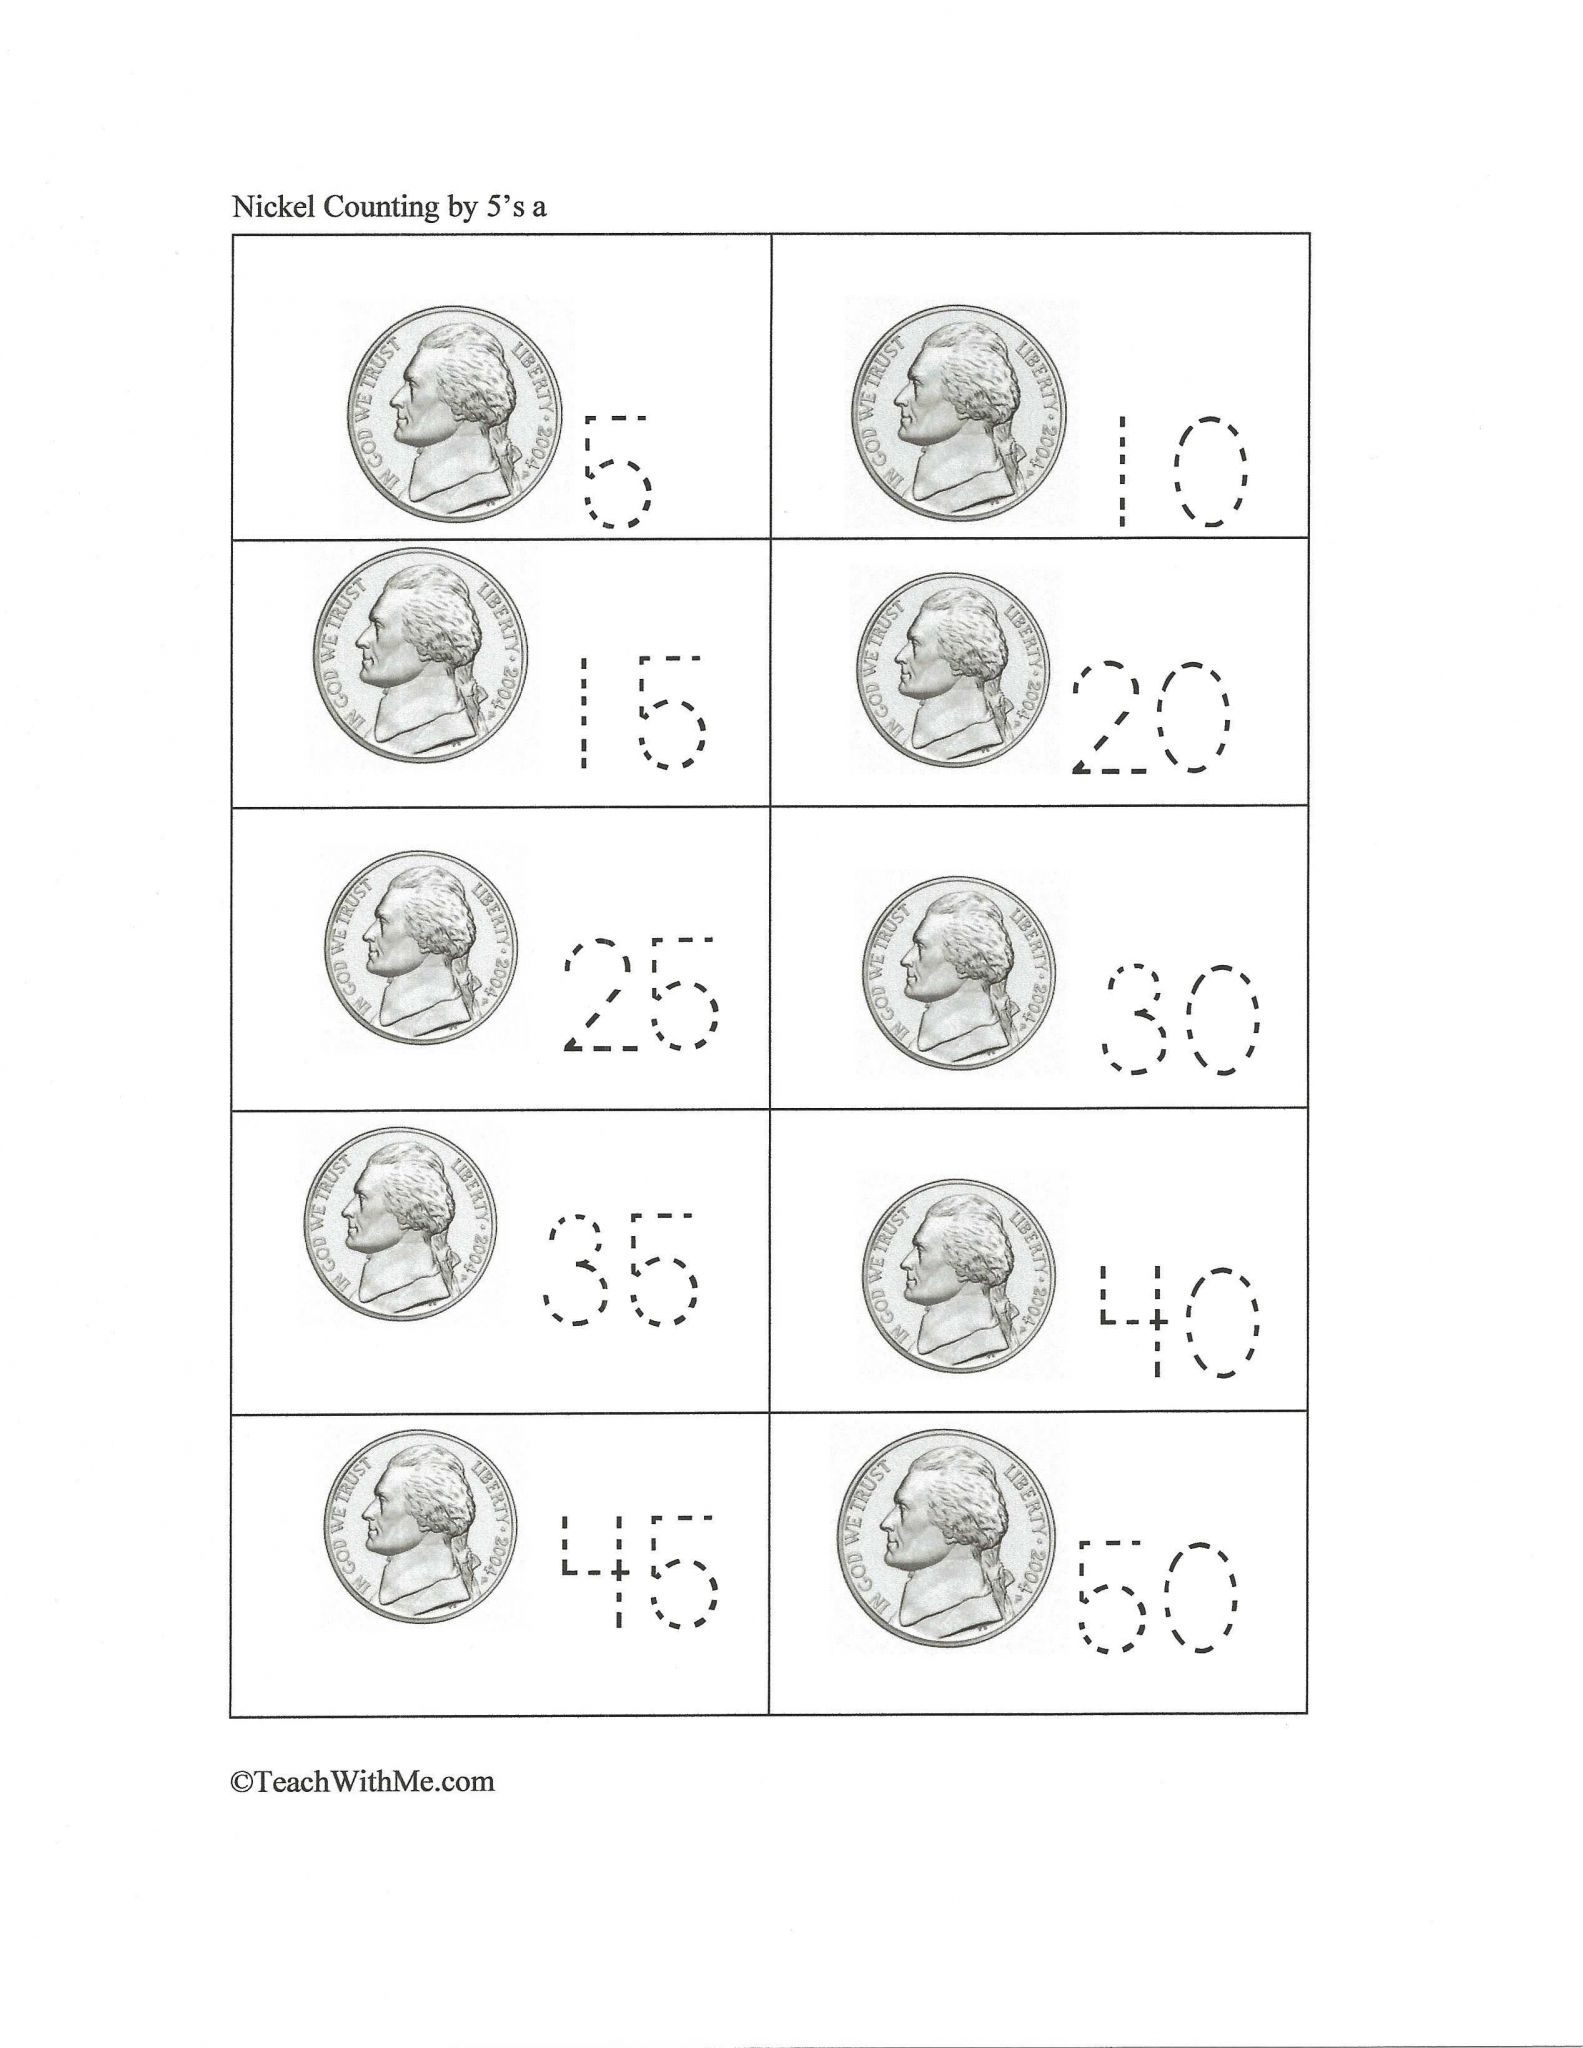 Customer Service Activity Worksheet with Counting Nickels Free Template Great Ideas School Interactive Simple